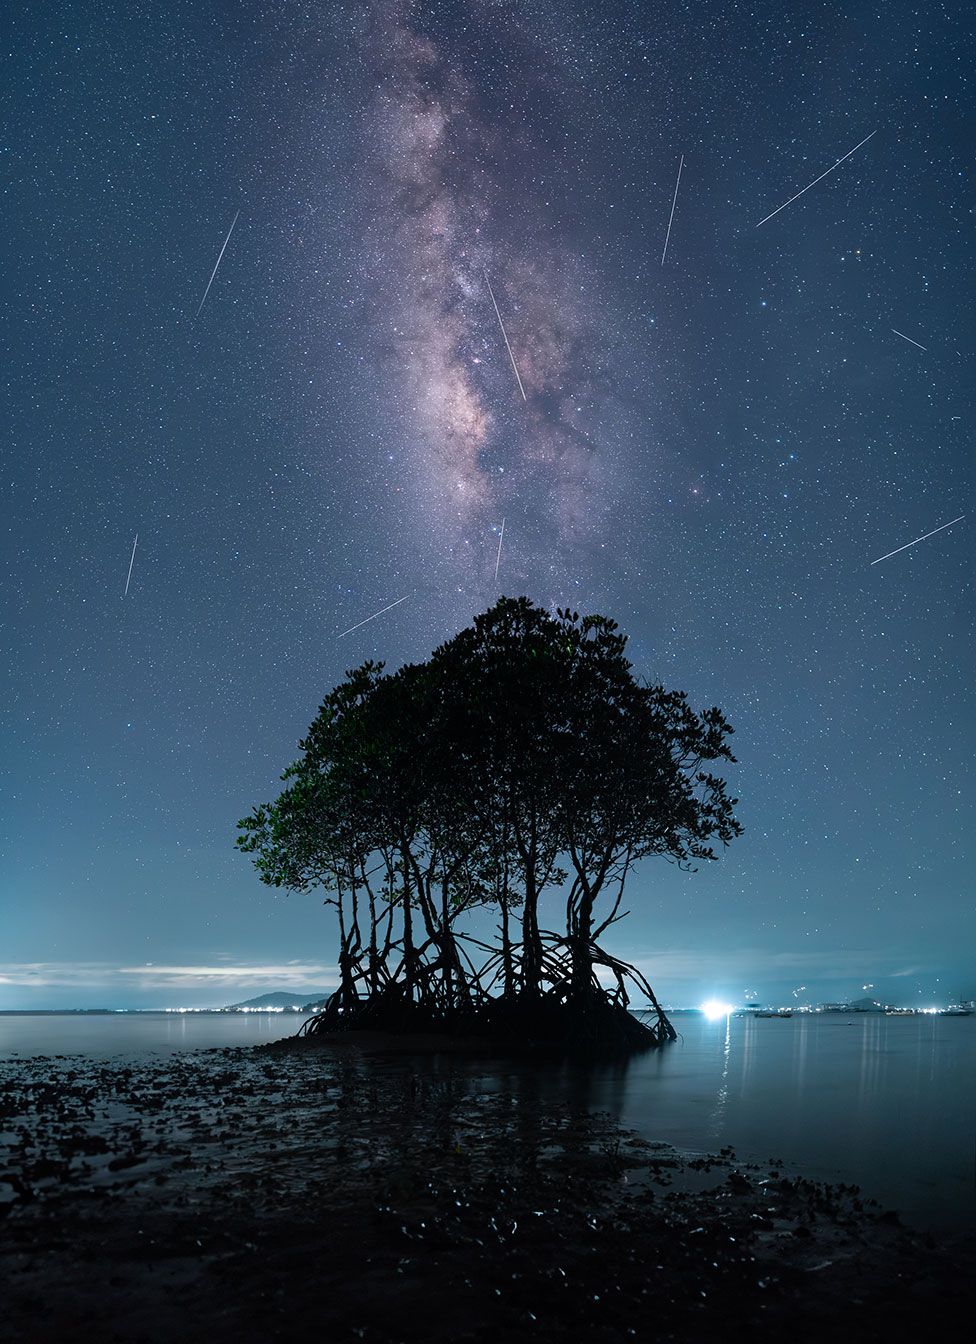 Lights from Bais City, the Milky Way and the Lyrid meteor shower next to mangrove trees in the Philippines